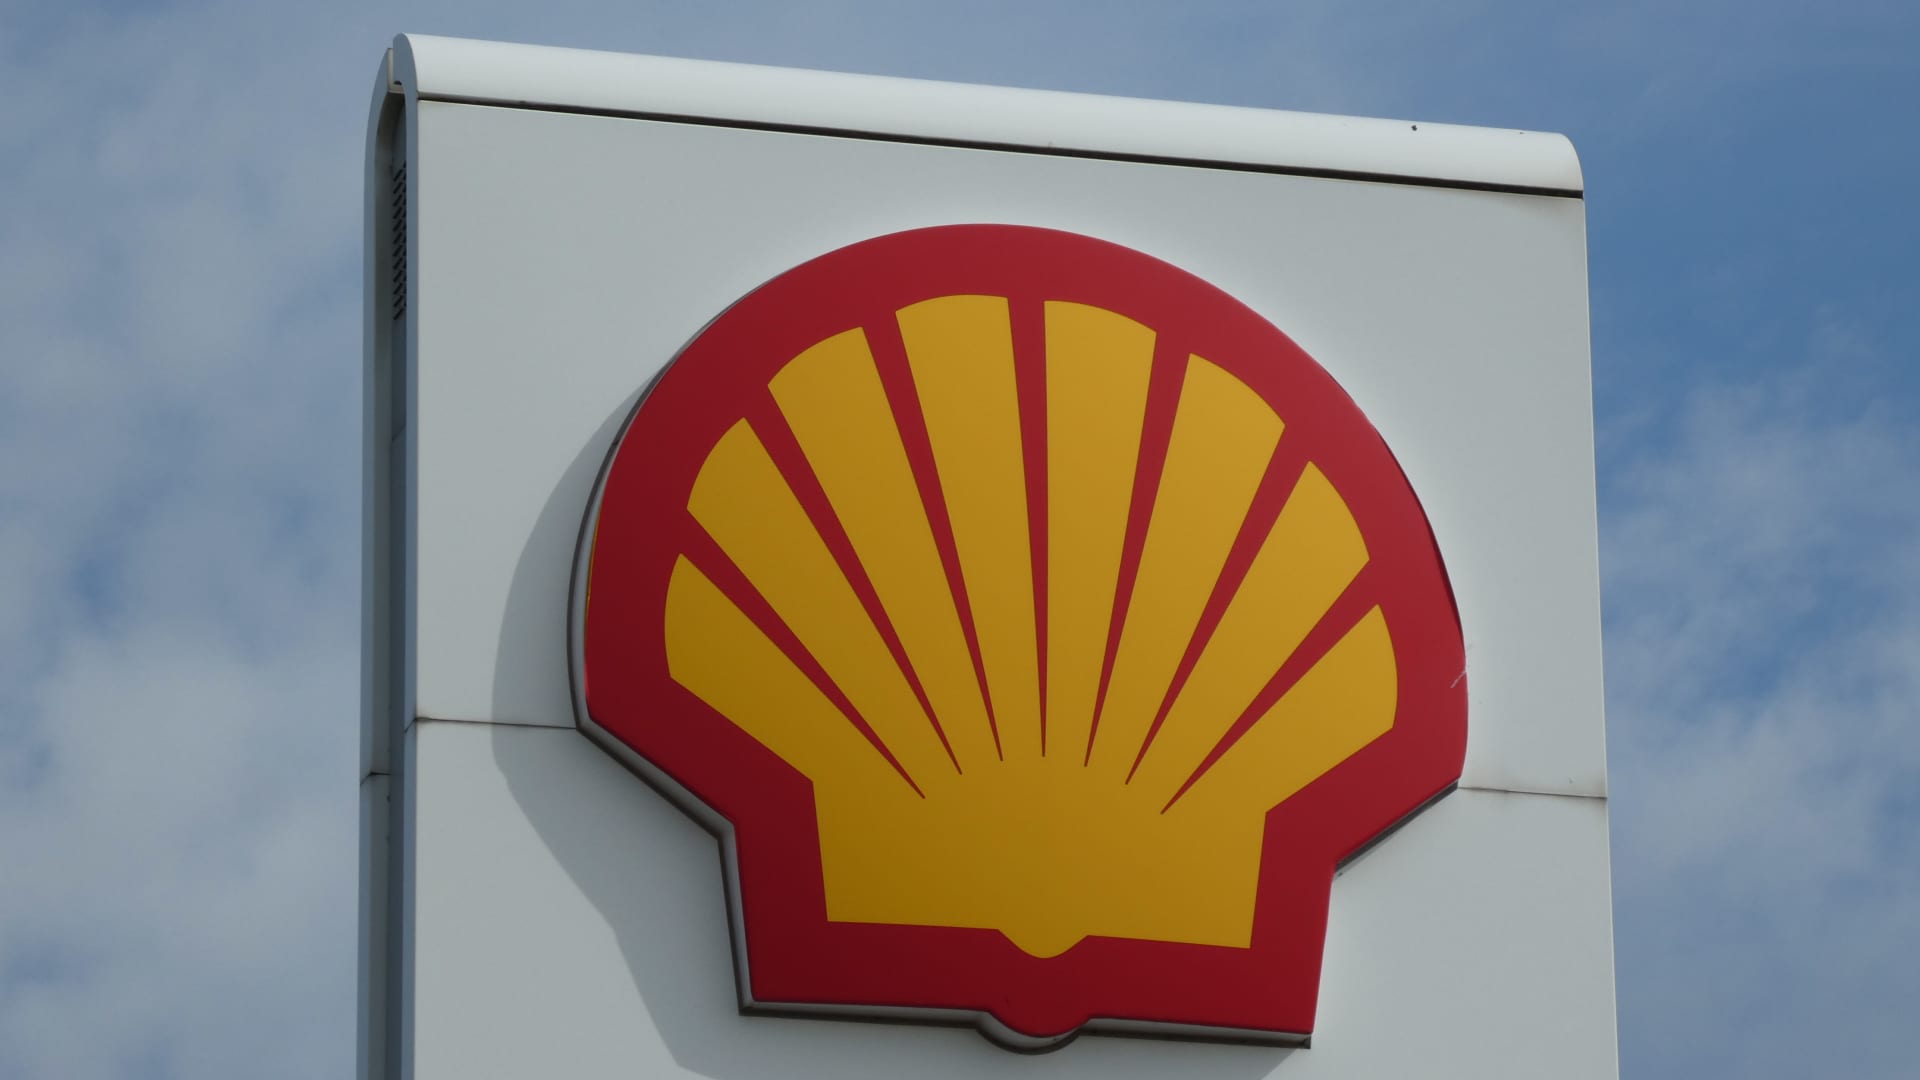 Oil giant Shell posts sharp drop in second-quarter profit on weaker commodity prices